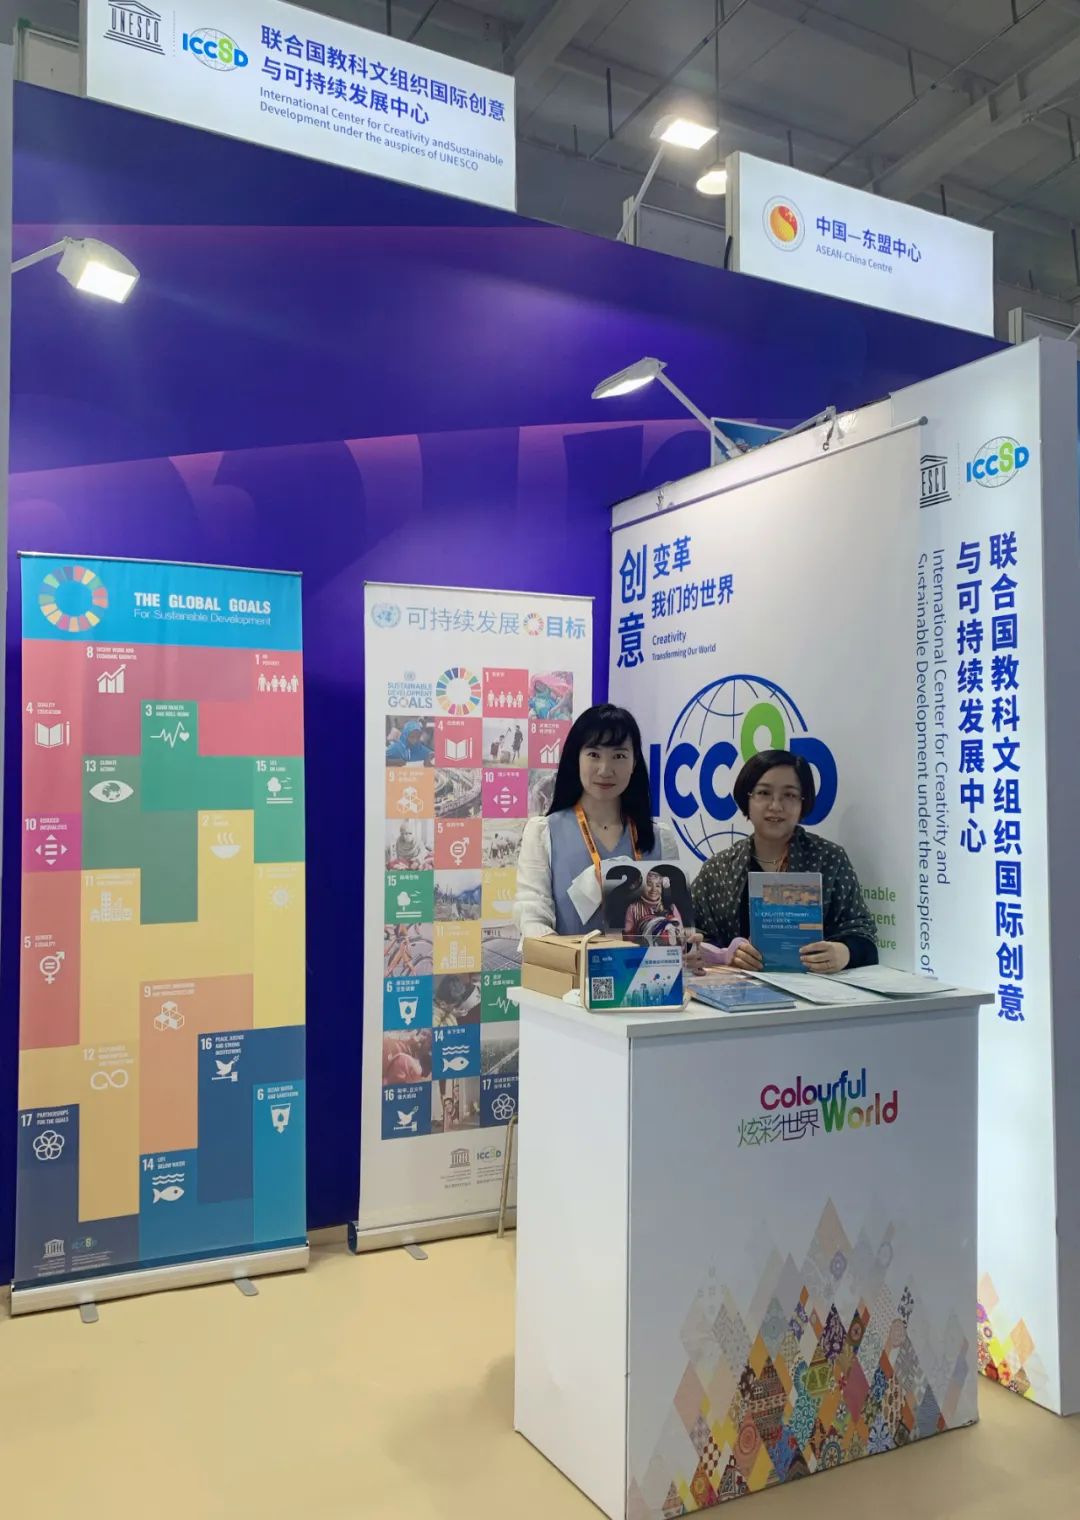 ICCSD Participates in the 2022 CIFTIS Culture & Tourism Services Exhibition_fororder_微信图片_20220906102744